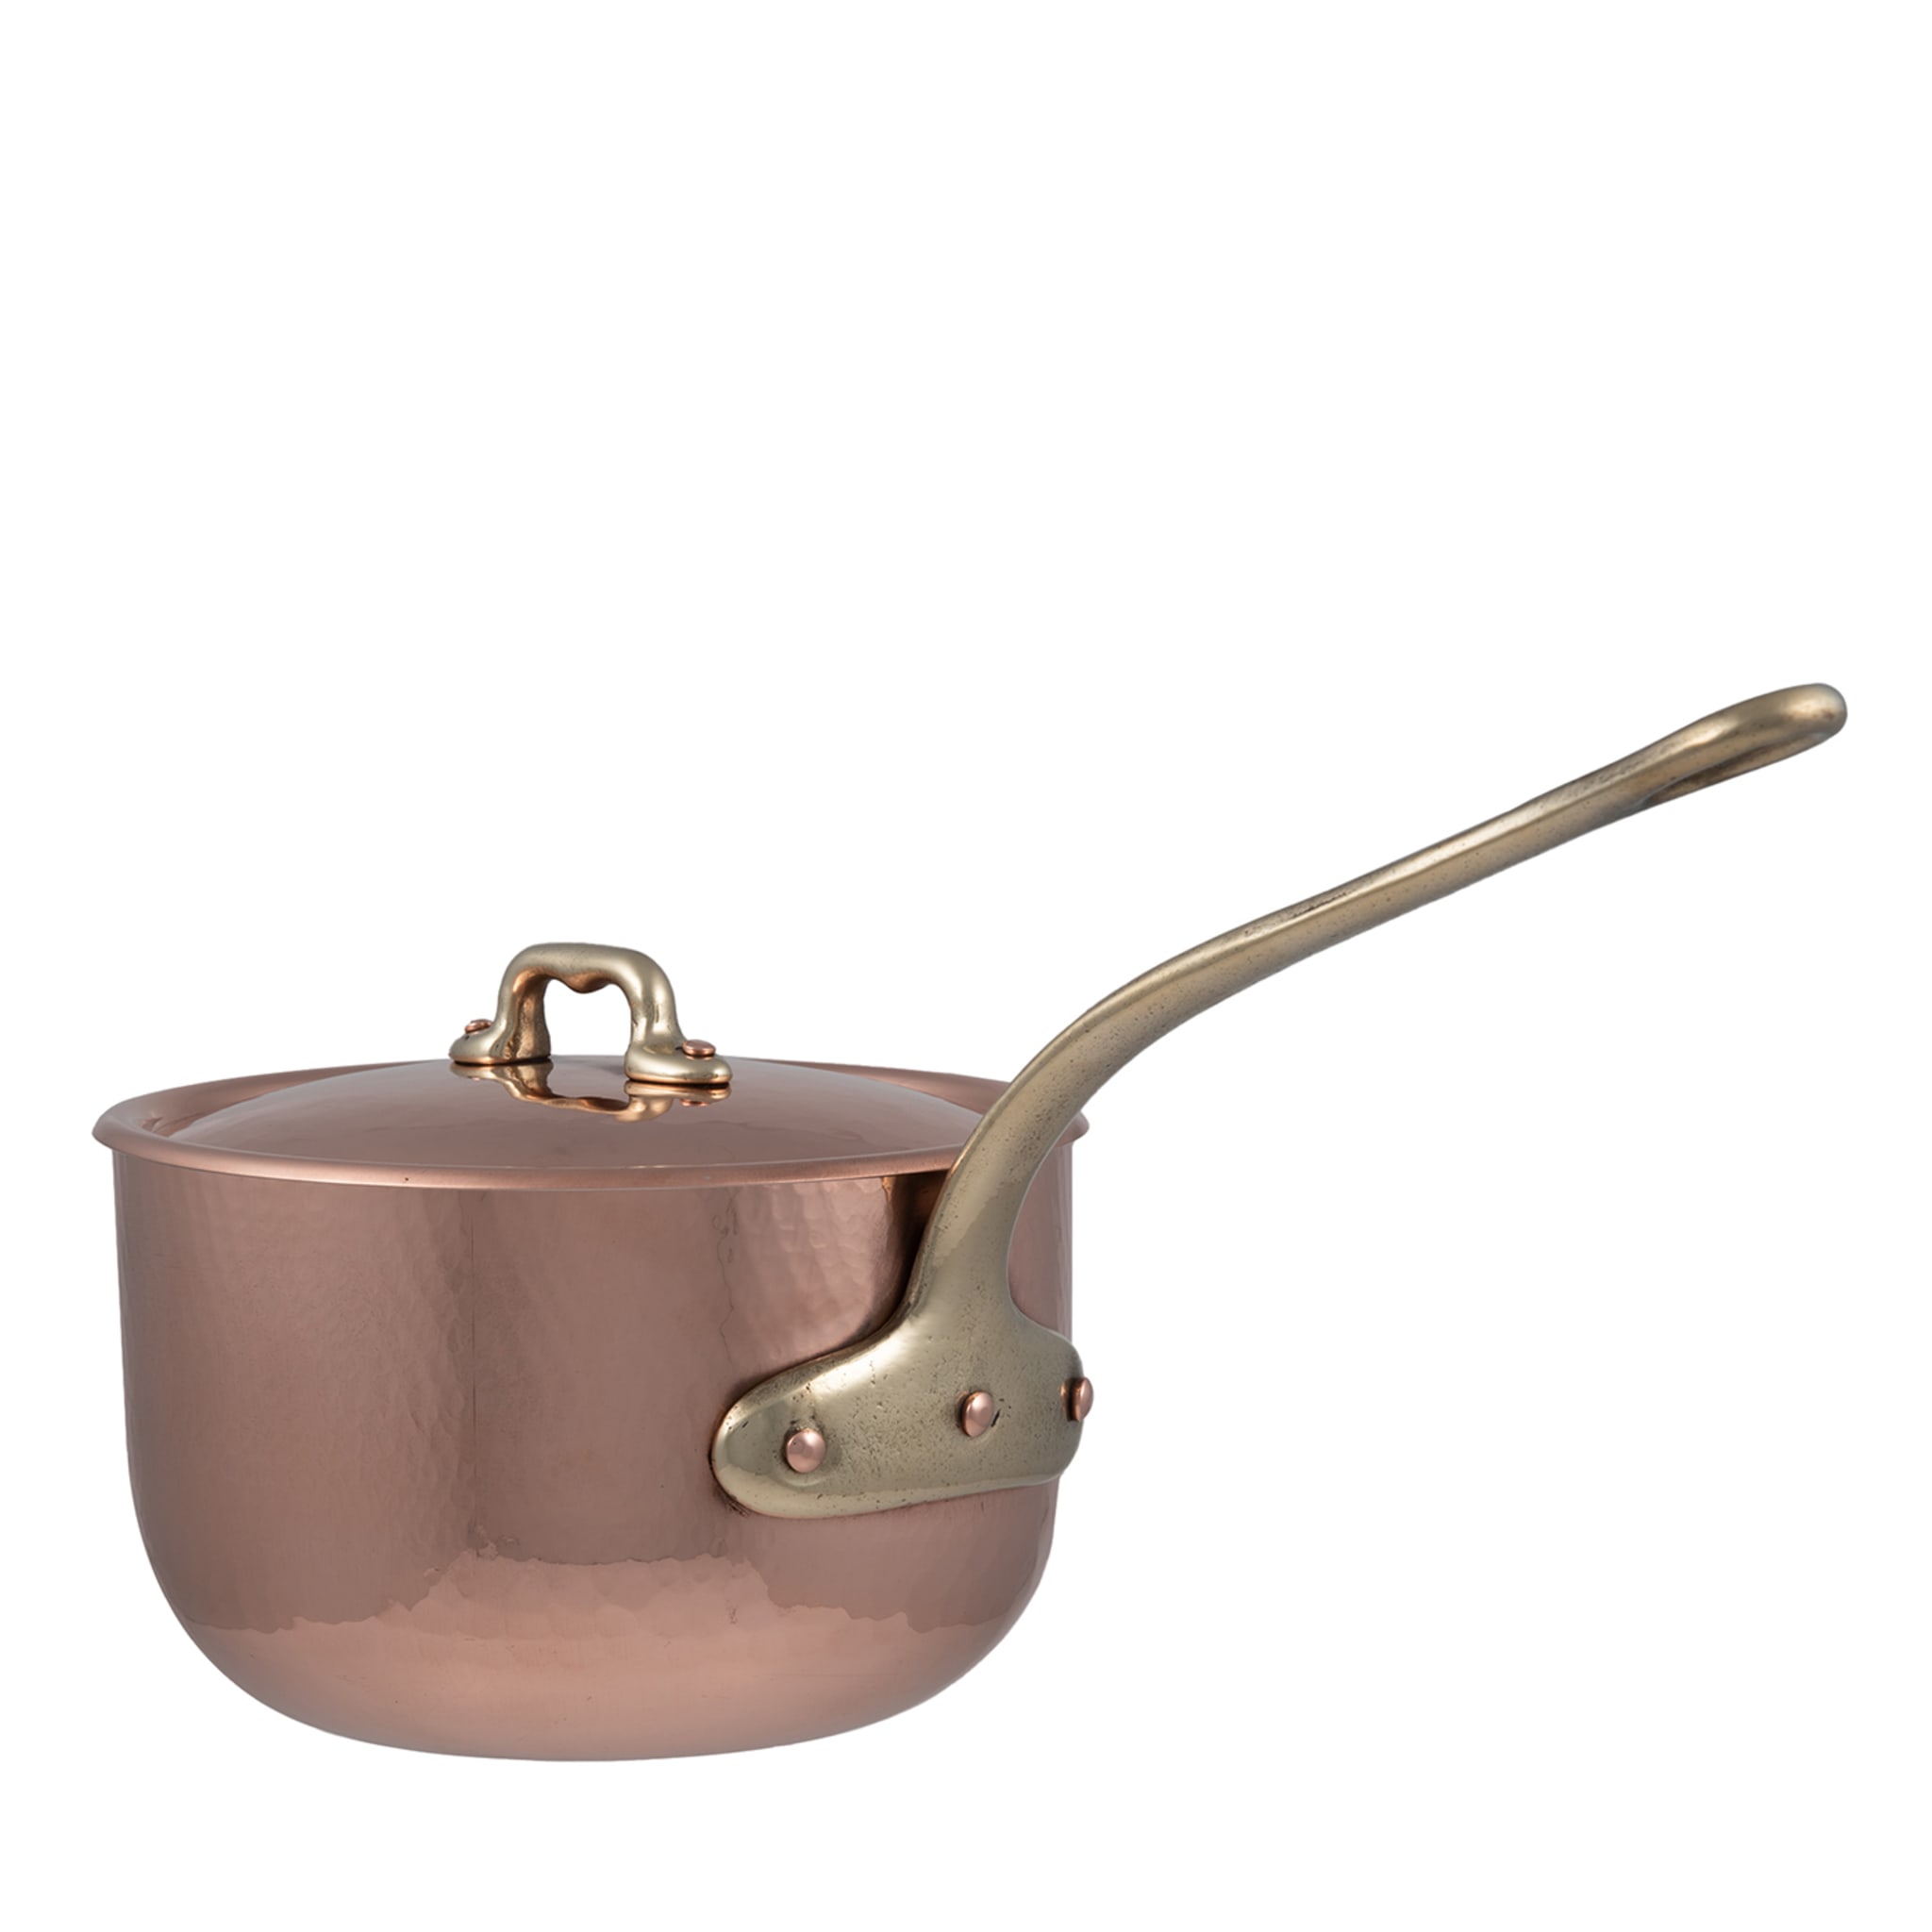 Silver lined Copper Saucepan Dish with Lid - Main view